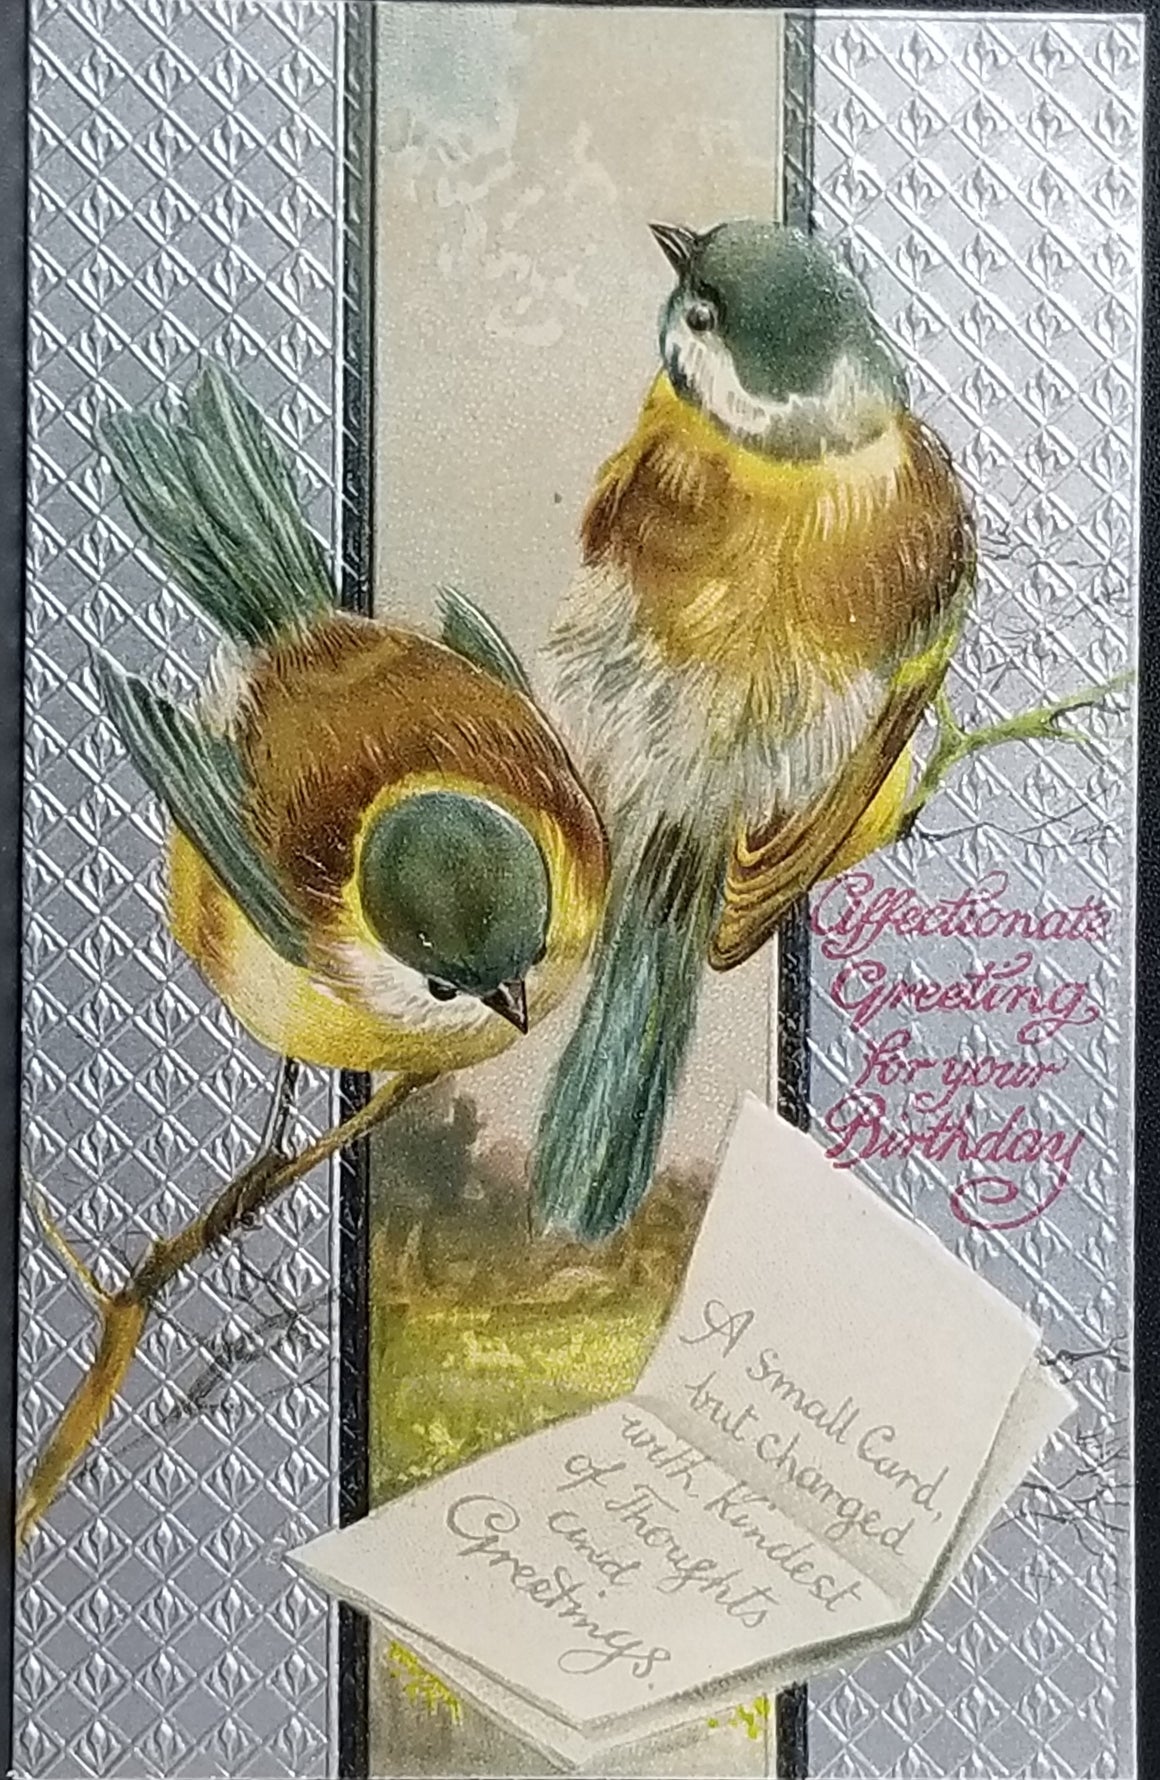 Birthday Postcard Silver Embossed w/ Two Songbirds and Greetings